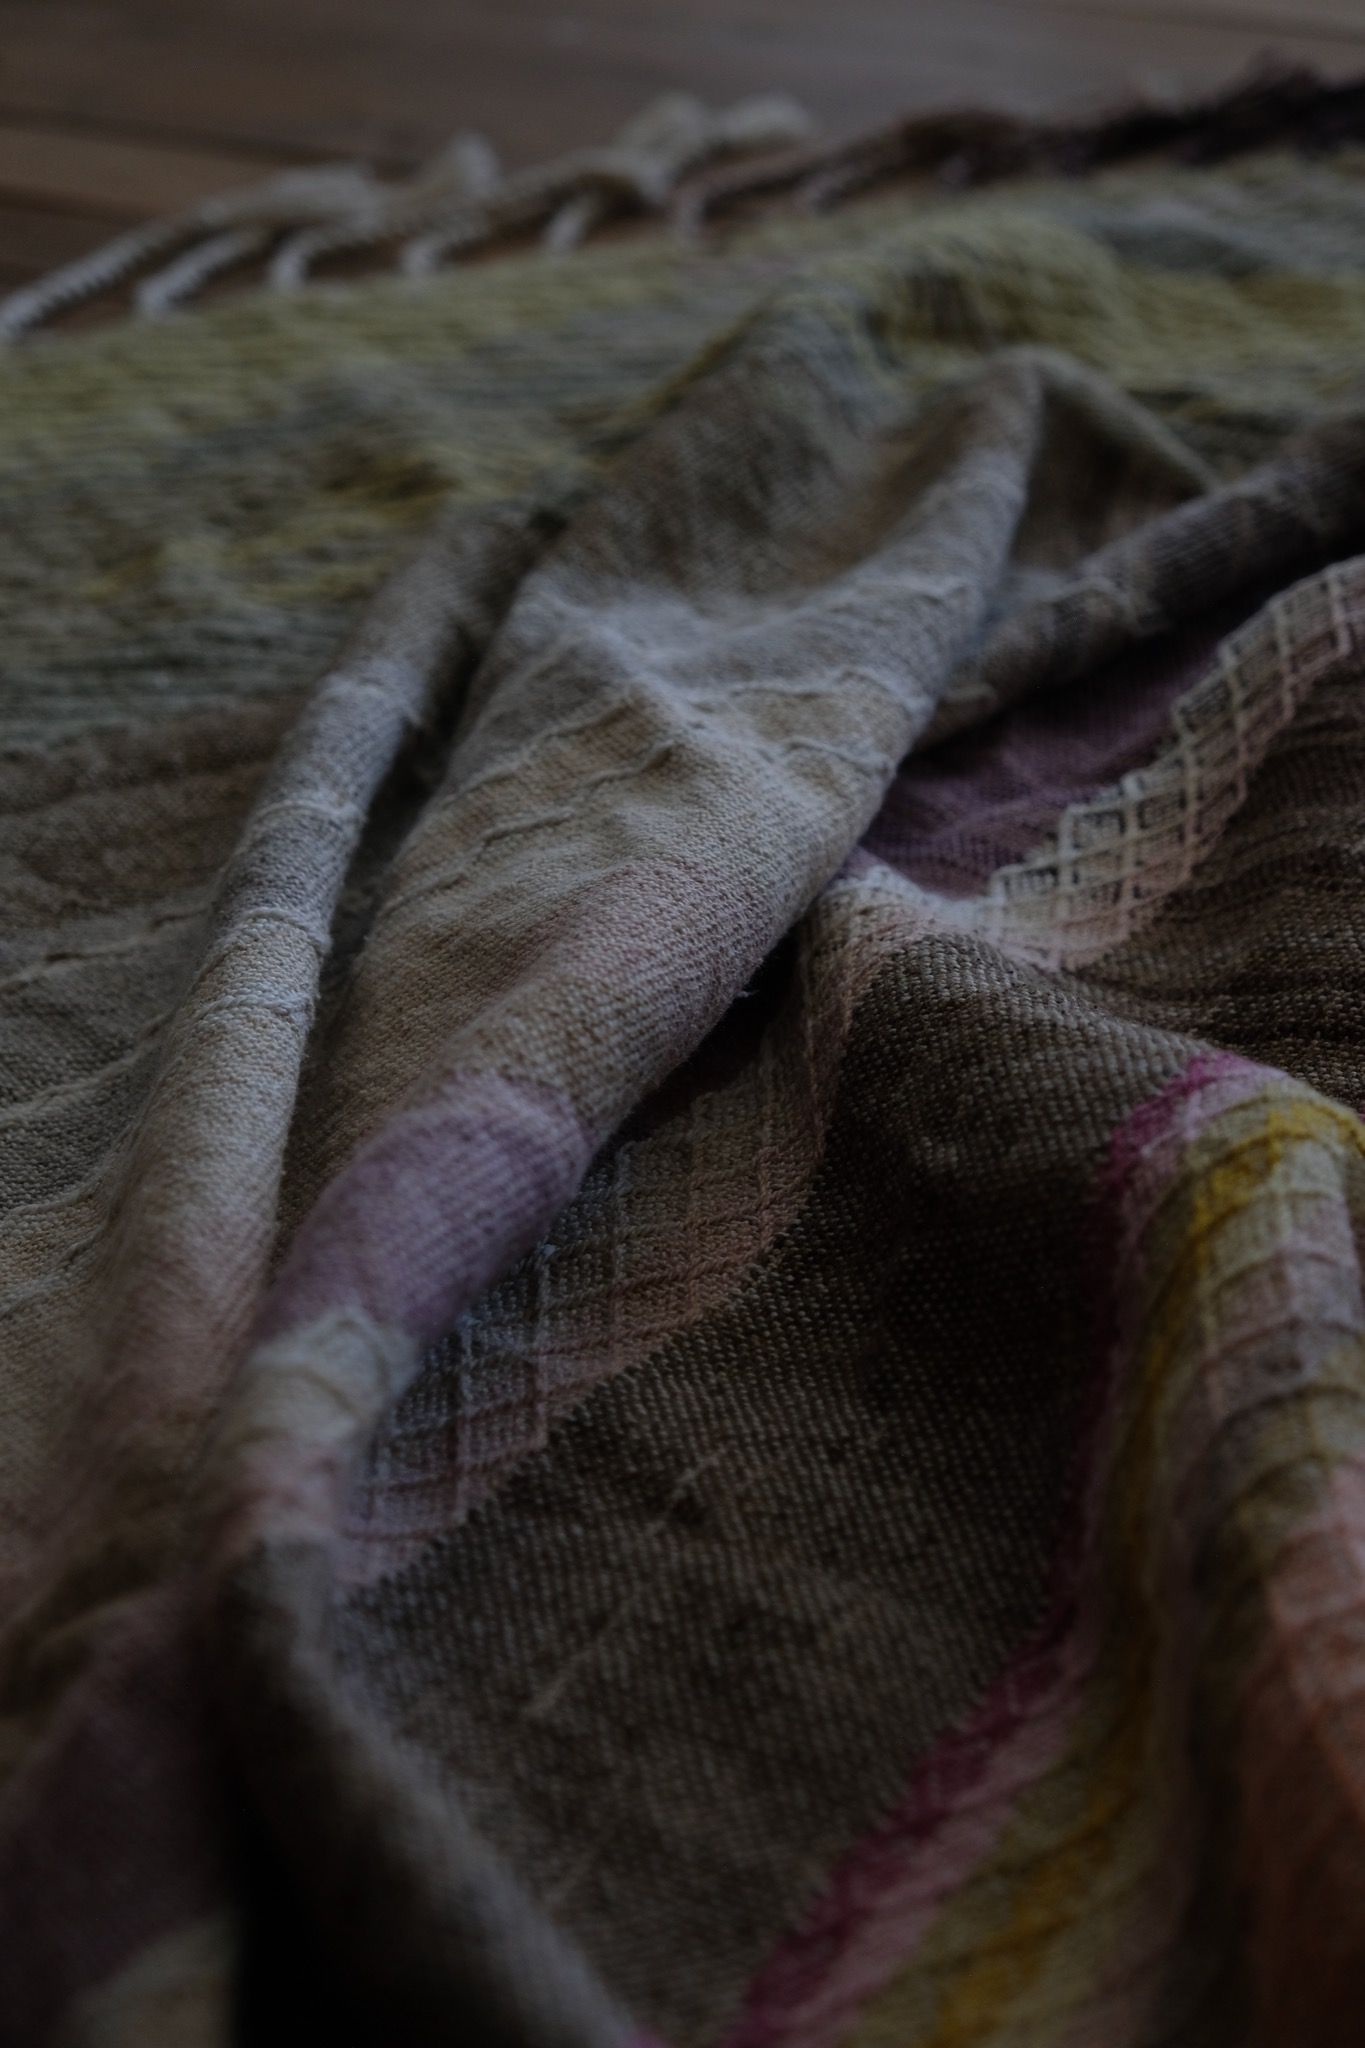 Detail of Handwoven fabric in a naturally dyed rainbow of grey, browns, greens, pinks, purples, yellow and orange lays on a wooden floor